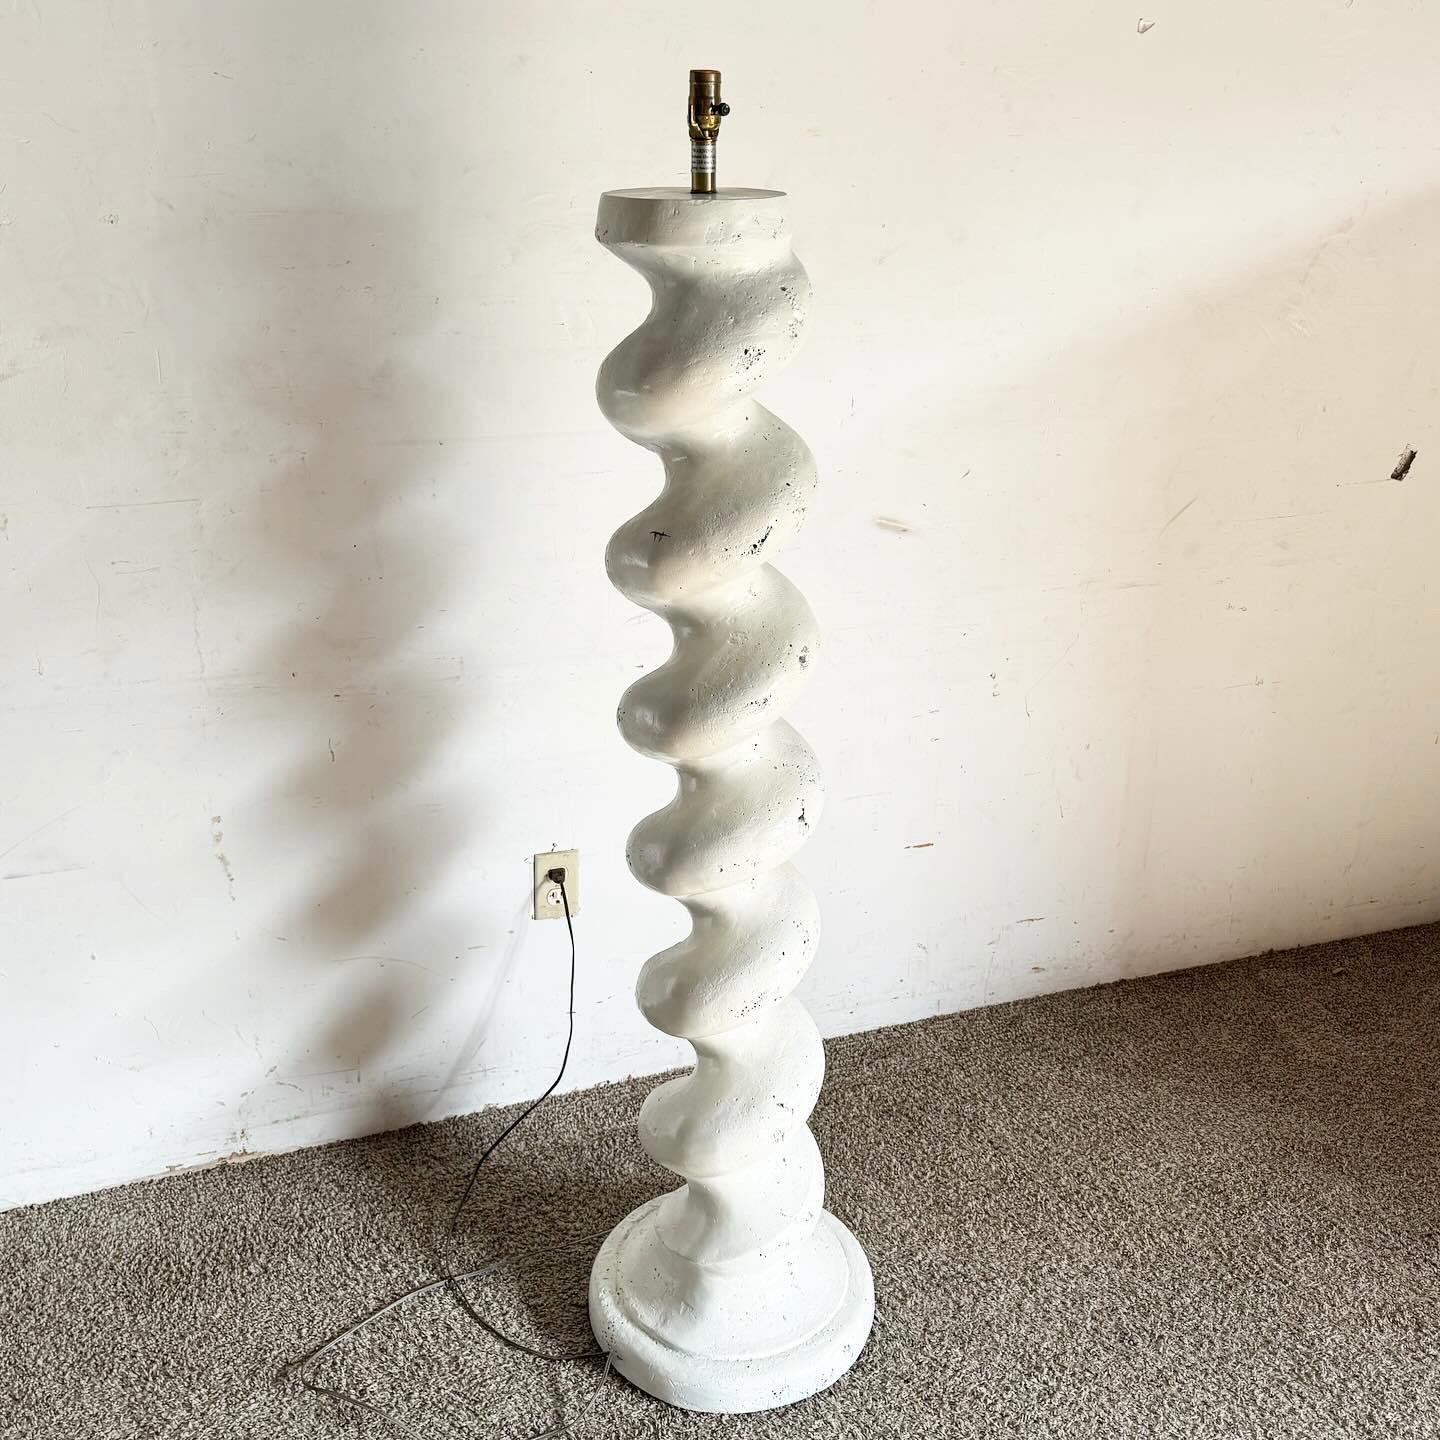 Discover the Postmodern White Plaster Spiral Floor Lamp by Michael Taylor, a fusion of art and function. This floor lamp's unique spiral design, crafted in white plaster, brings a sculptural and dynamic presence to any space. Its smooth lines and